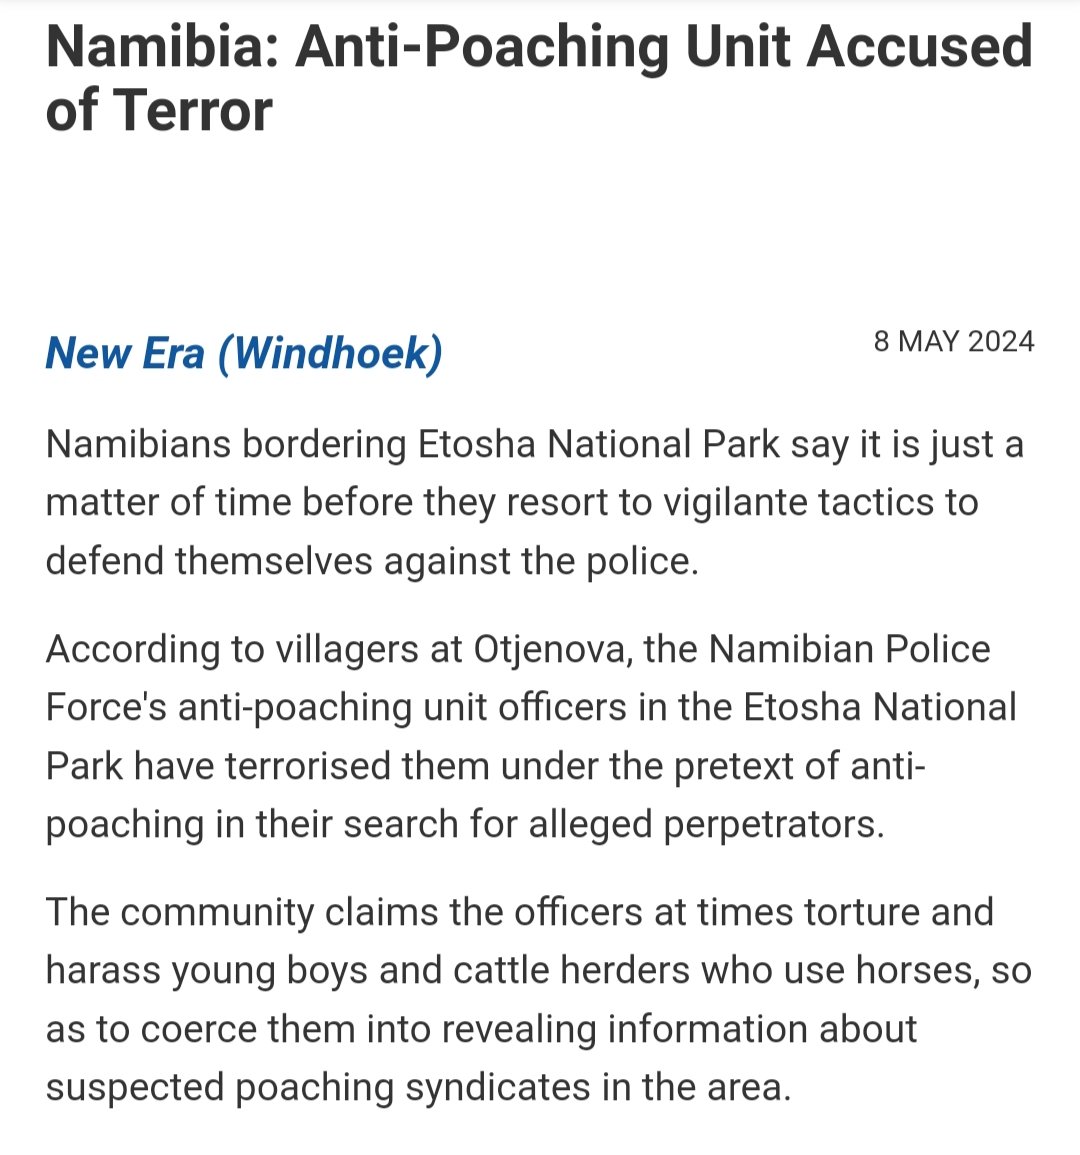 #Namibia Anti-Poaching Unit Accused of Terror According to villagers at Otjenova, the Namibian Police Force's anti-poaching unit officers in the Etosha National Park have terrorised them under the pretext of anti-poaching in their search for alleged perpetrators @MinistryofEnvi2